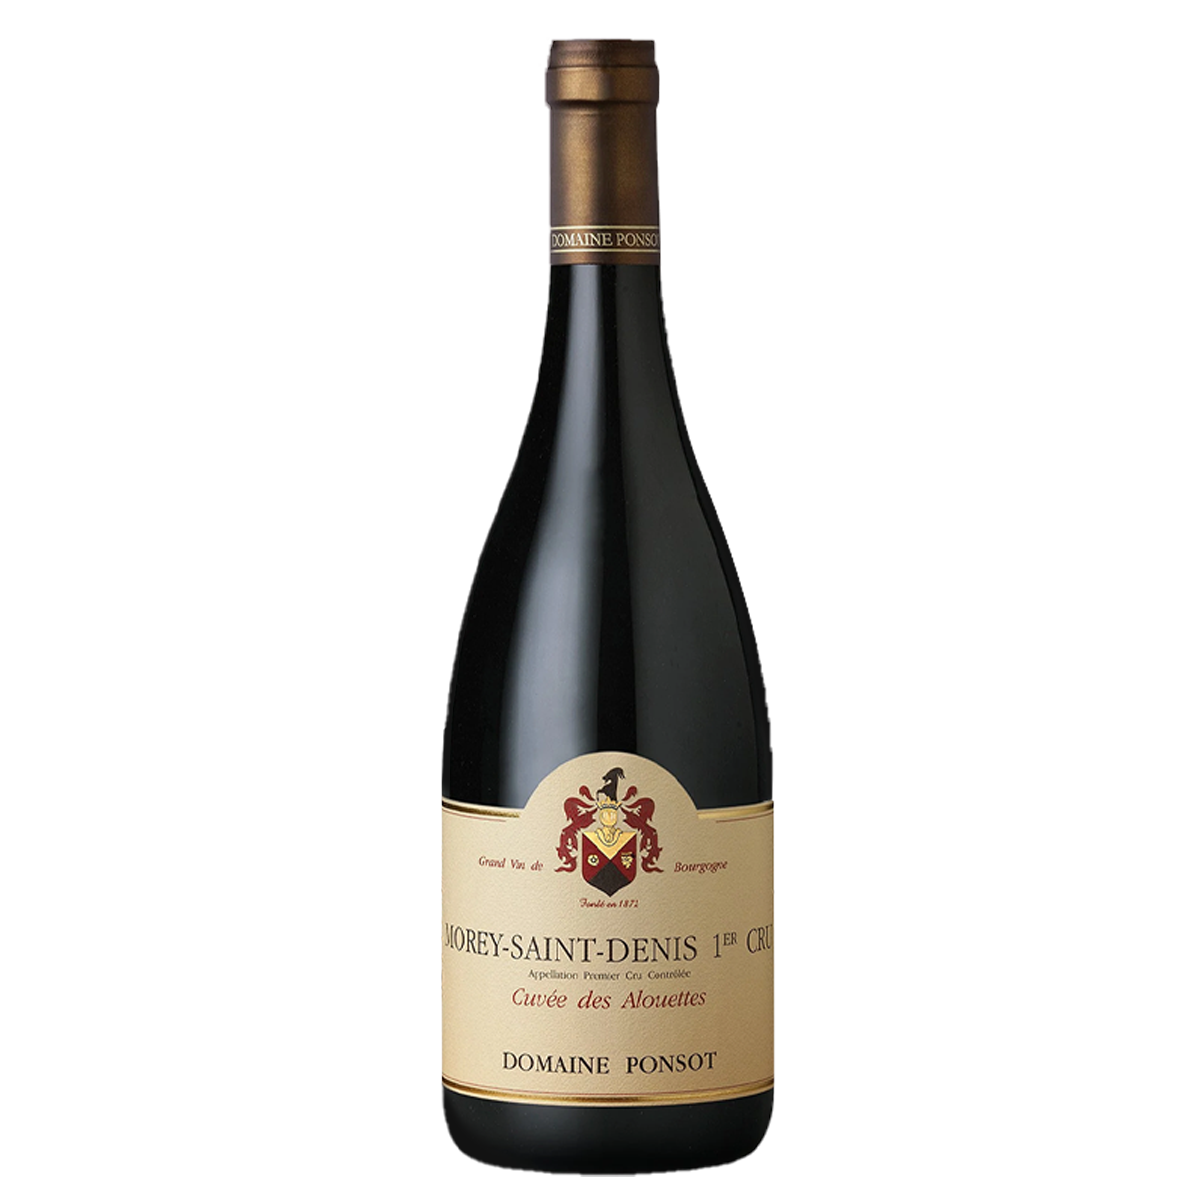 Offer: Domaine Ponsot